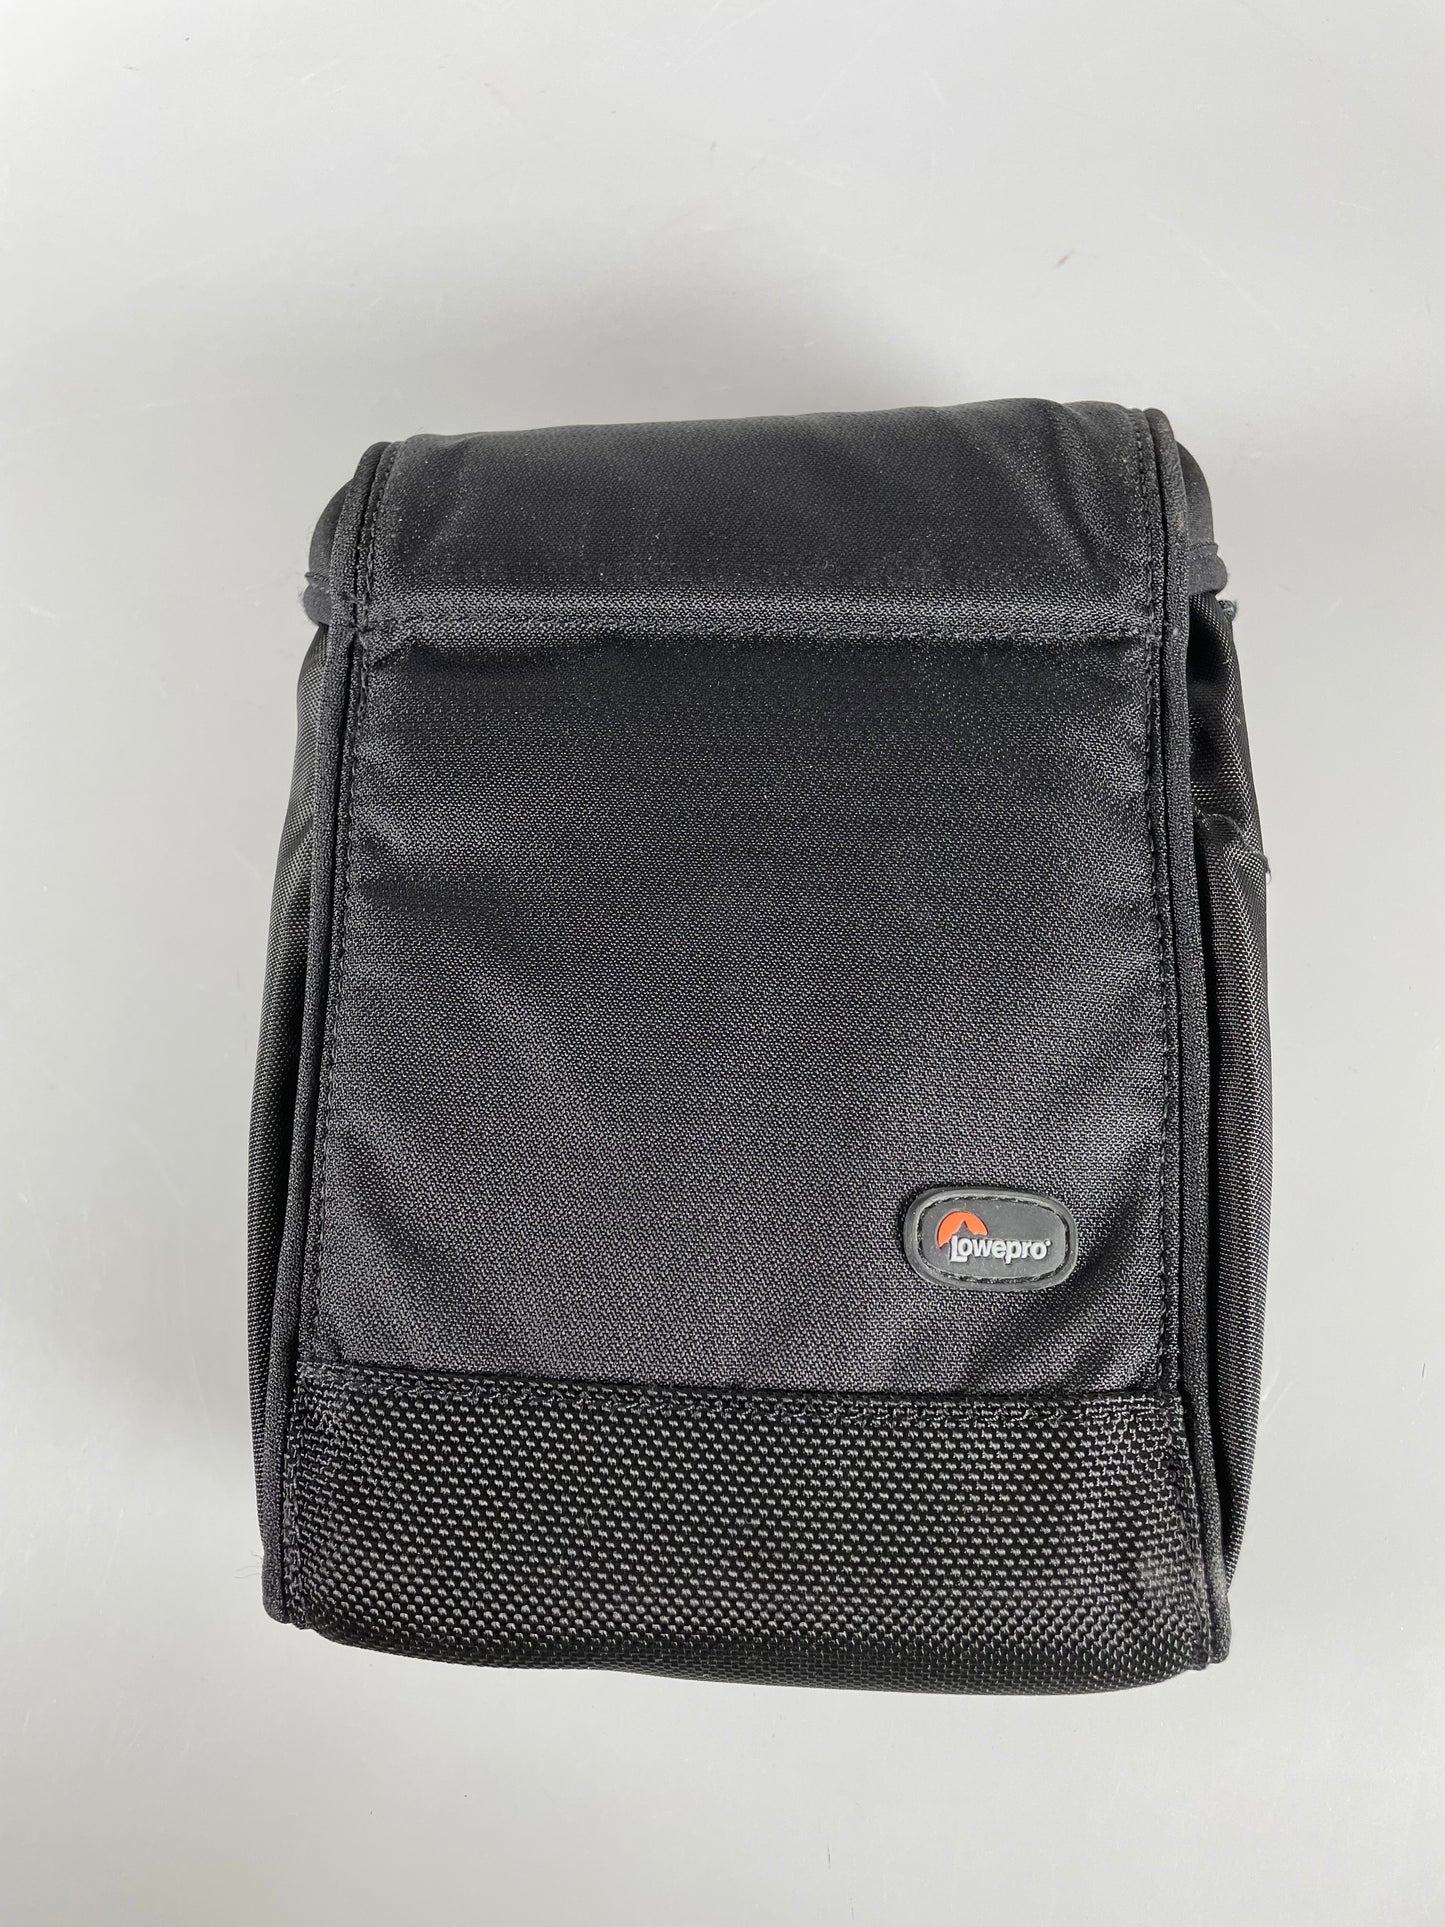 Lowepro S&F filter pouch 100 Bag case for square and rectangular